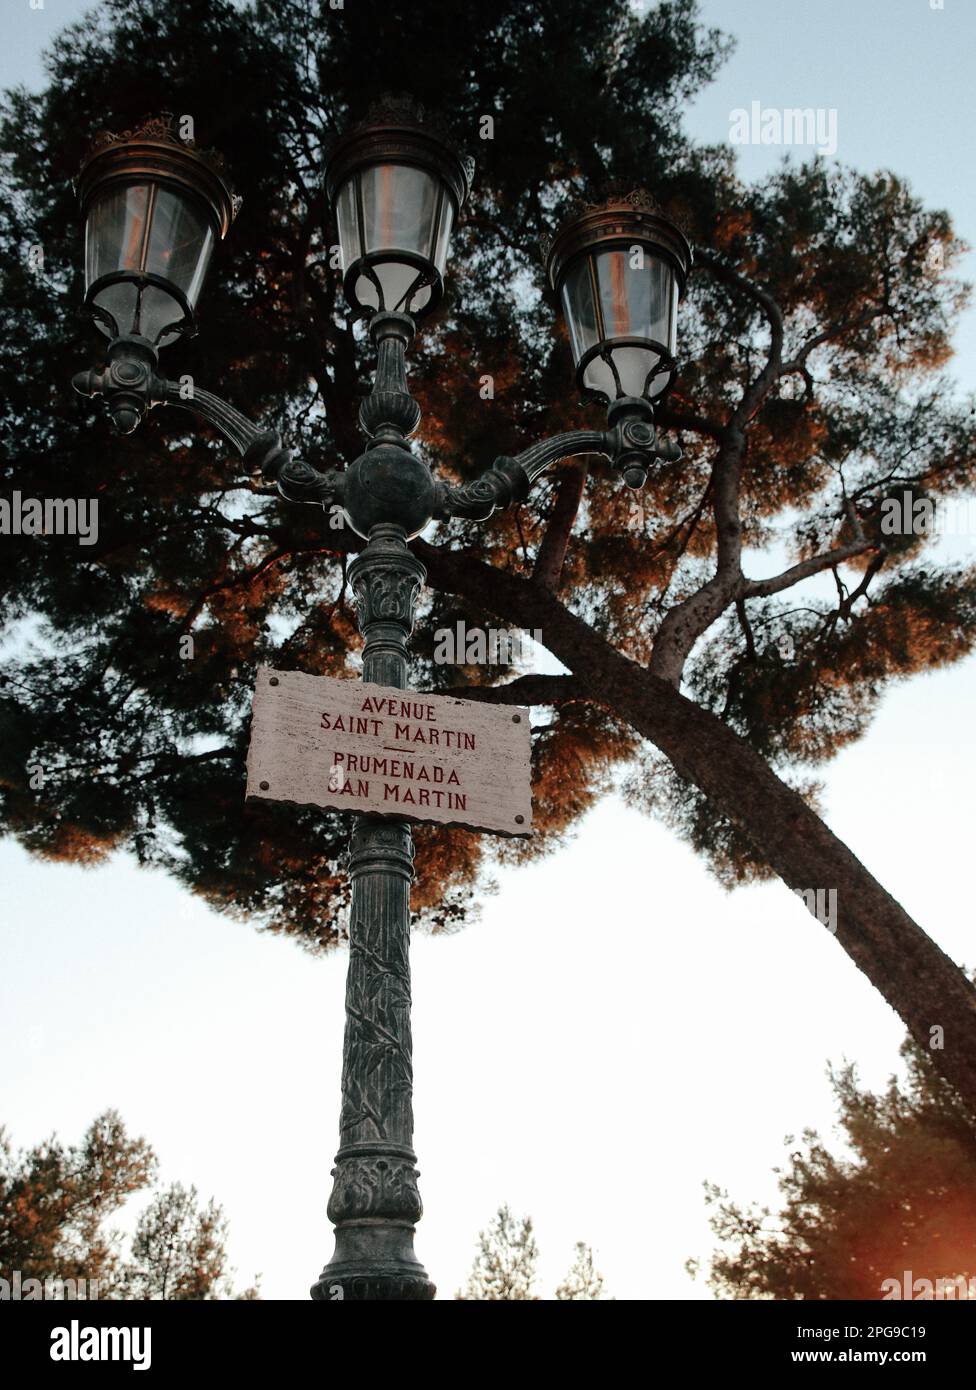 An antiquated street lamp with a sign attached to its frame, standing in a modern cityscape Stock Photo